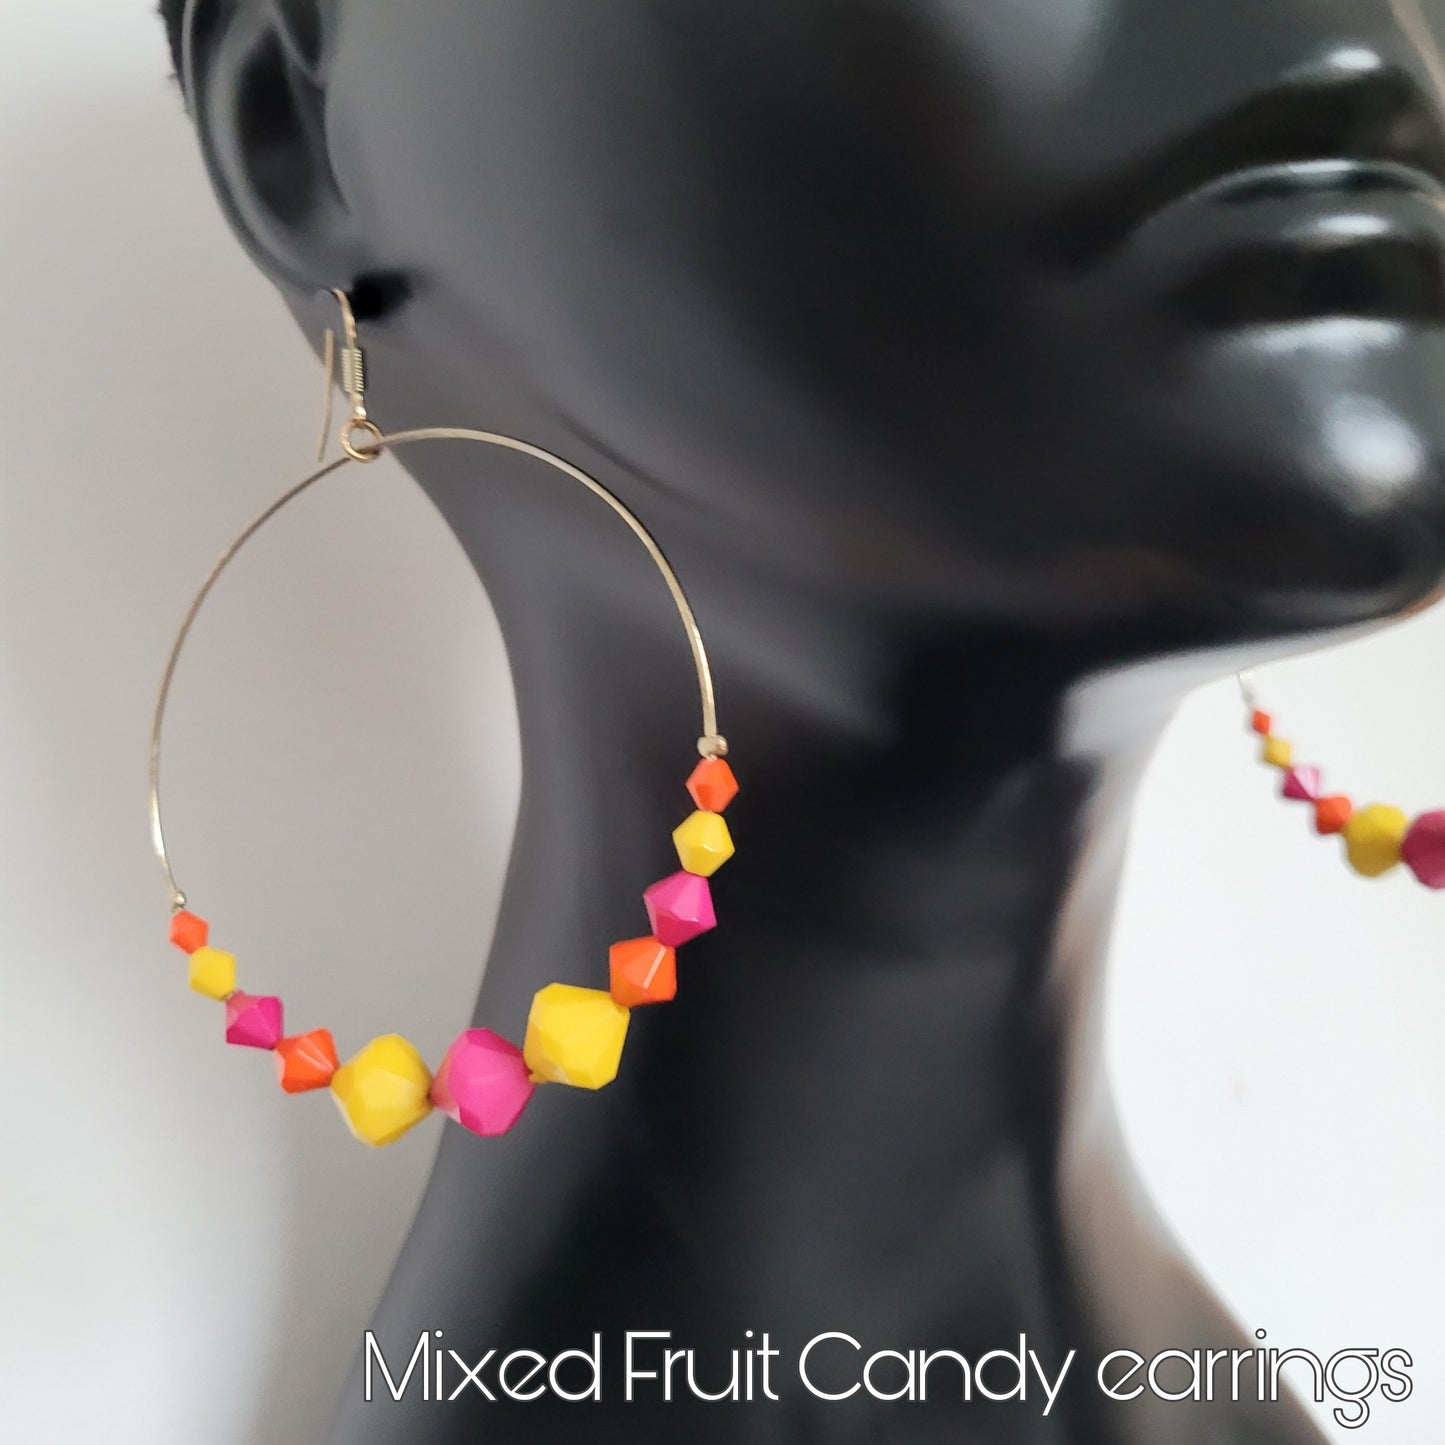 Neon Rainbow collection: The Mixed Fruit Candy Earrings